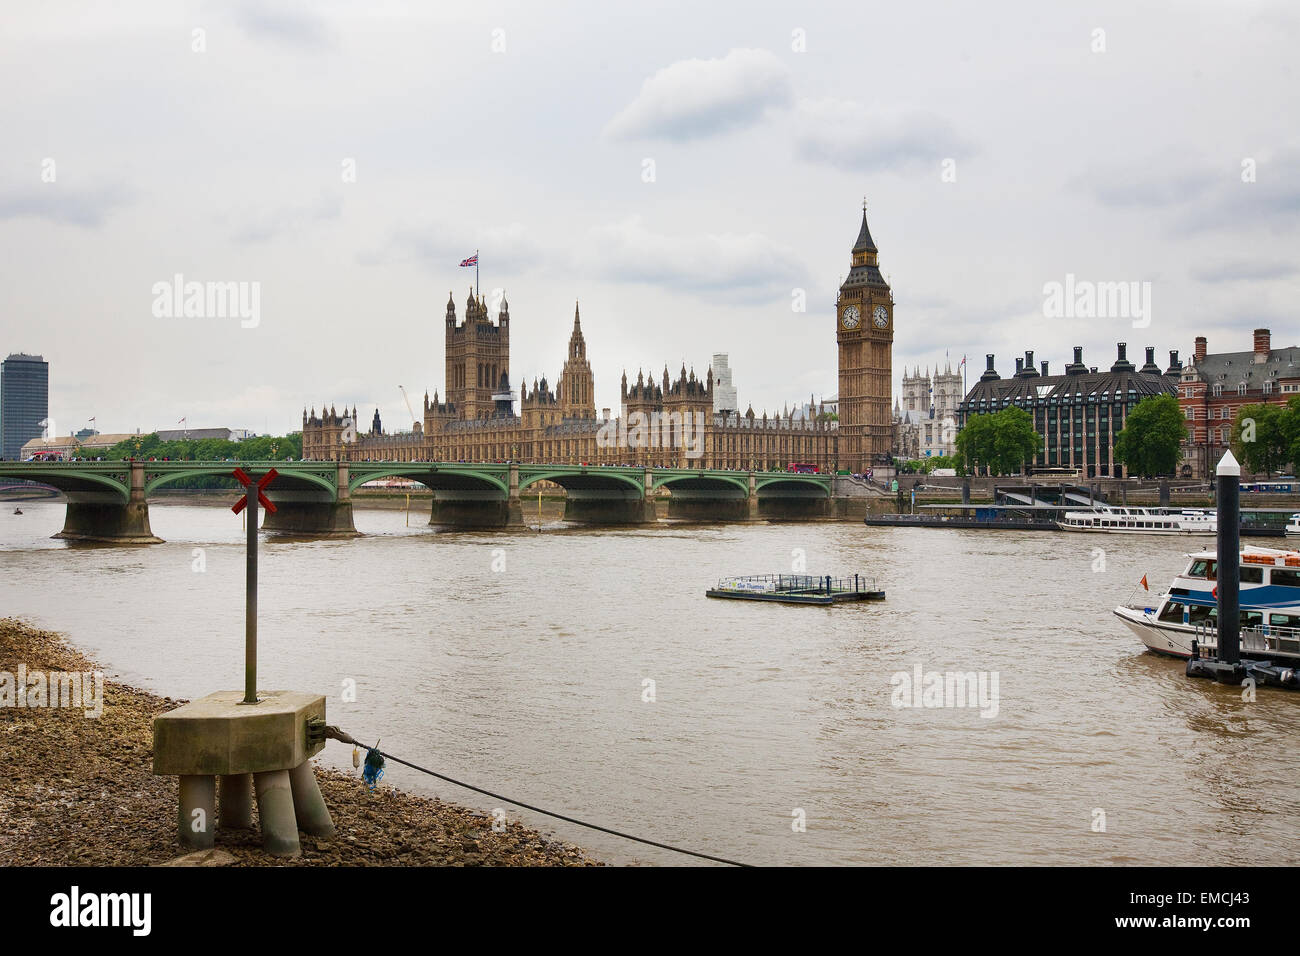 The house of parliament in London with Big Ben and Westminster Abbey in background Stock Photo